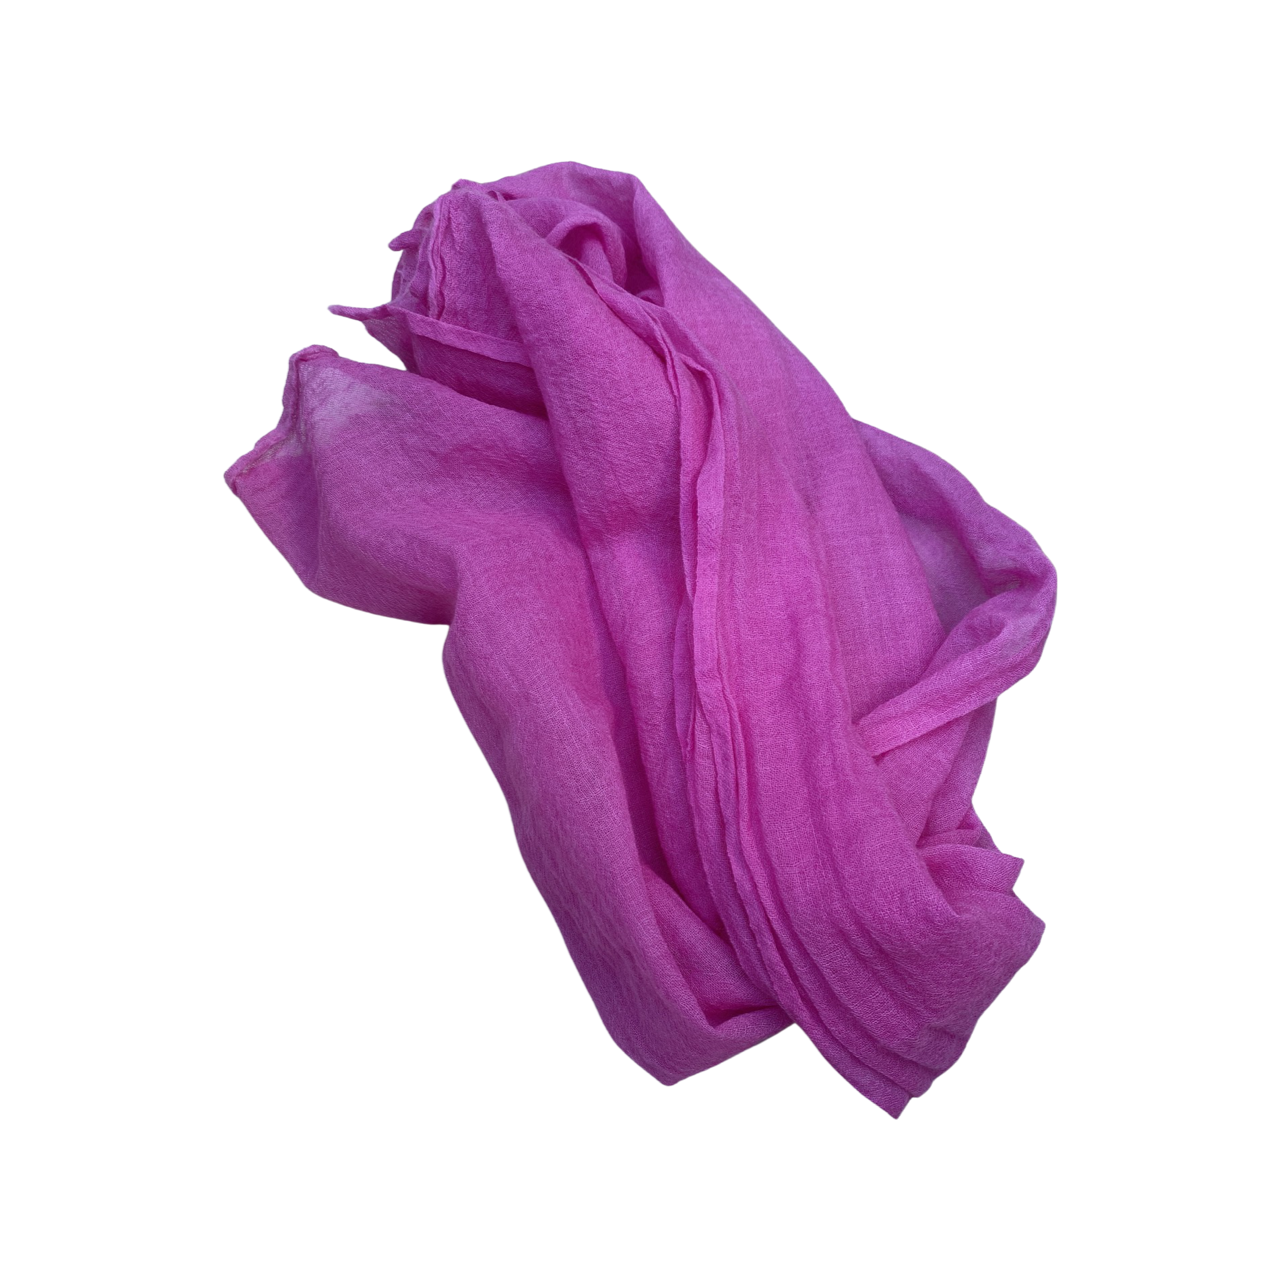 One-of-a-Kind Hand-Dyed Wool Gauze Scarf in Electric Orchid by 1 Life - Hand-Dyed Wool Scarf for Warm or Cold Weather